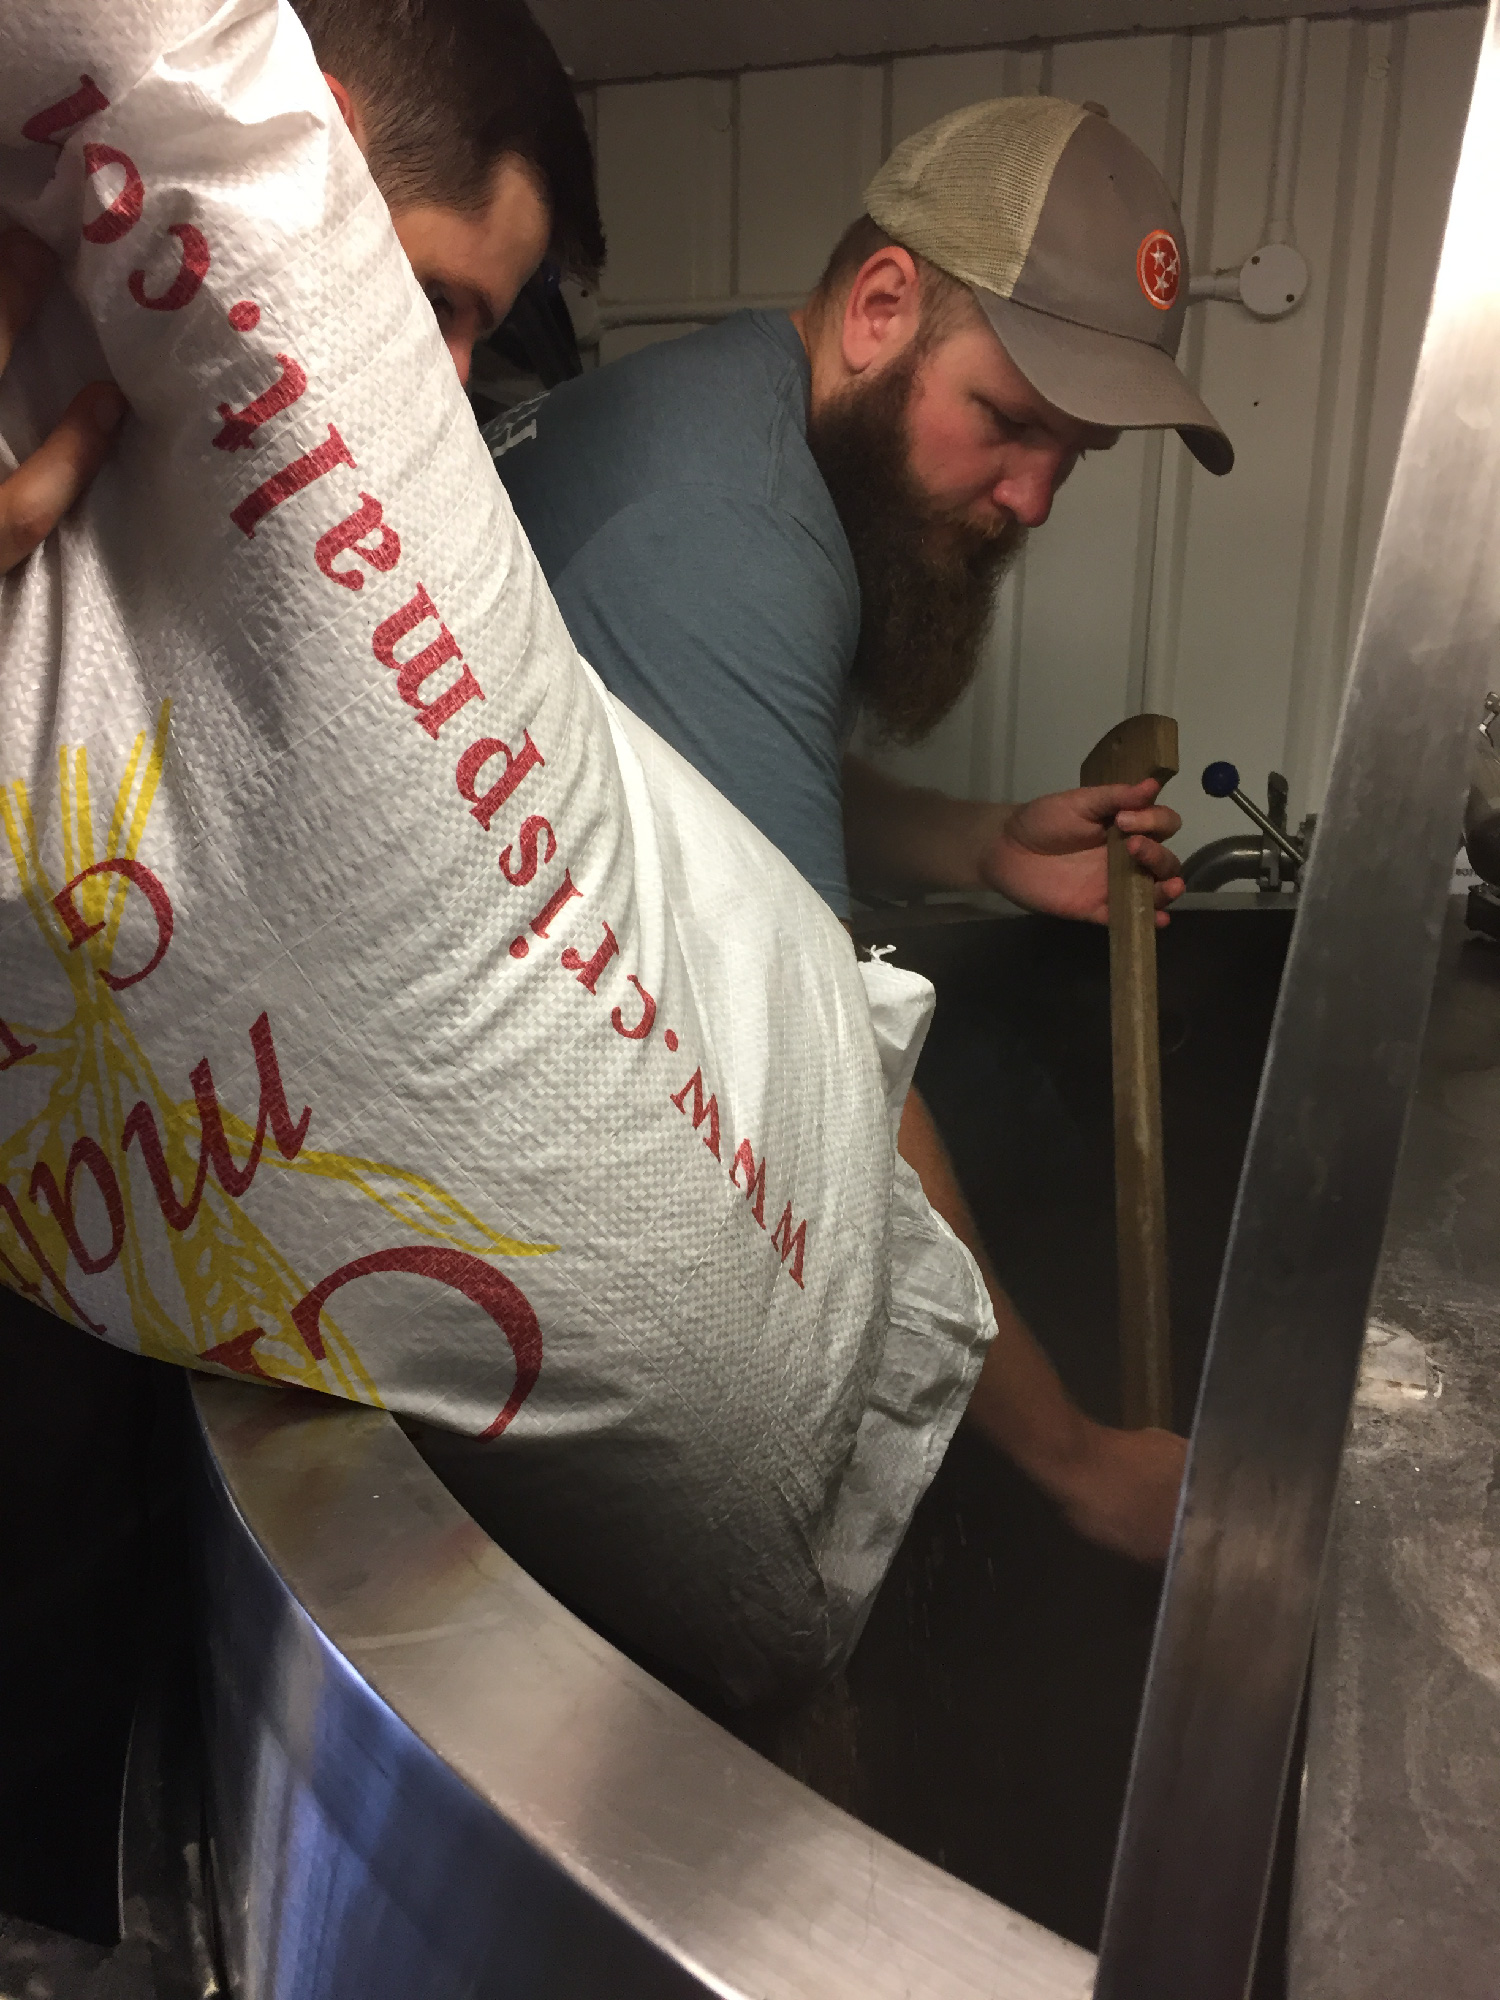 A heavily-bearded man mashing grain during a beer brew